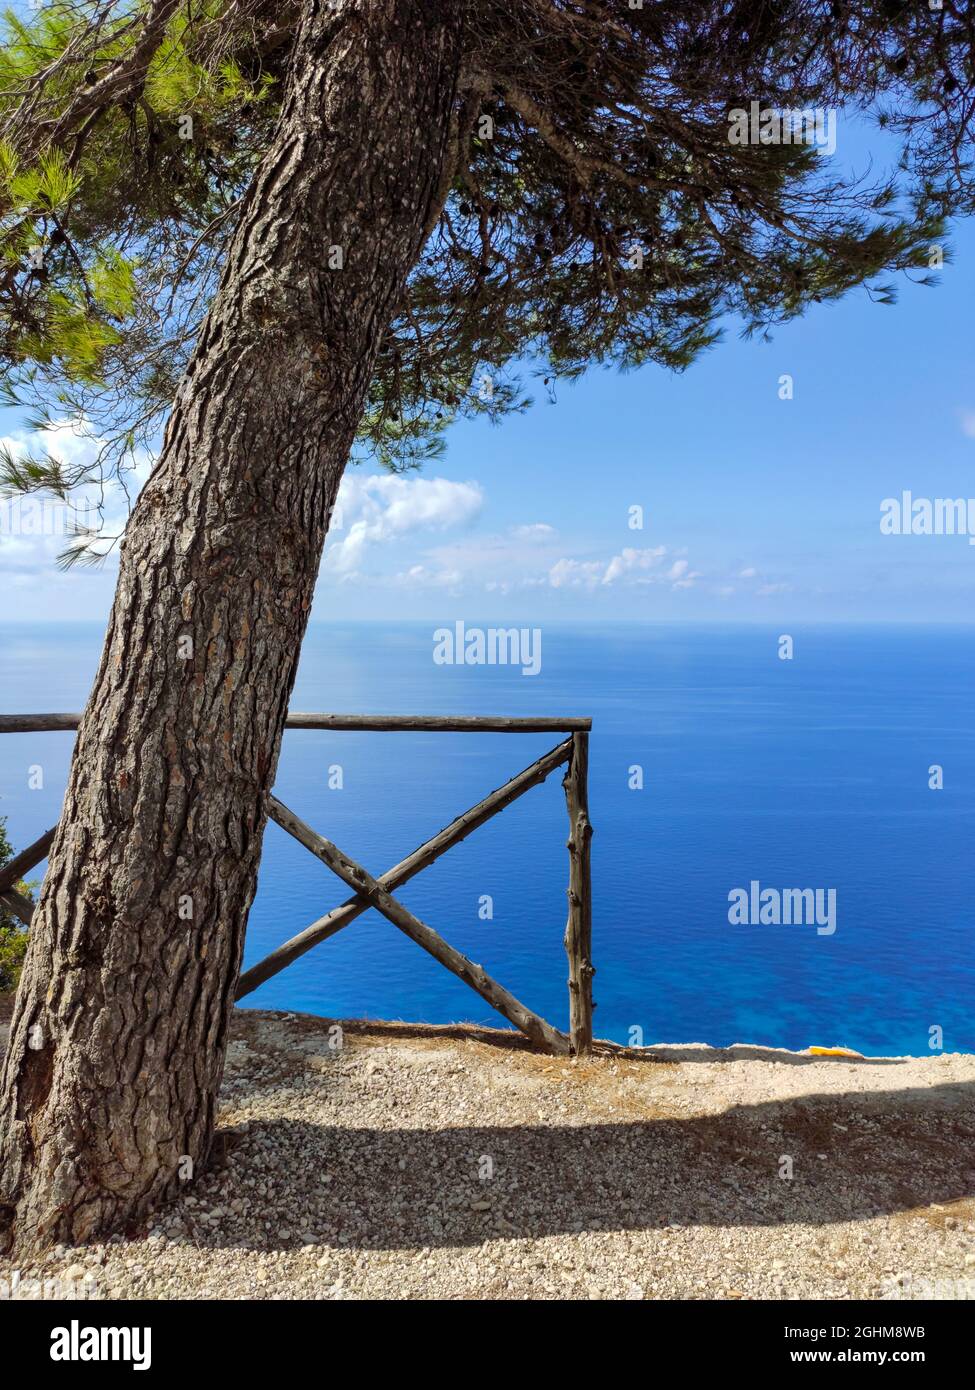 Egremni Beach Panorama observation deck with pine tree. Sunny view on sea turquoise water and scenic blue sky, Lefkada island, Ionian sea coast, Greec Stock Photo